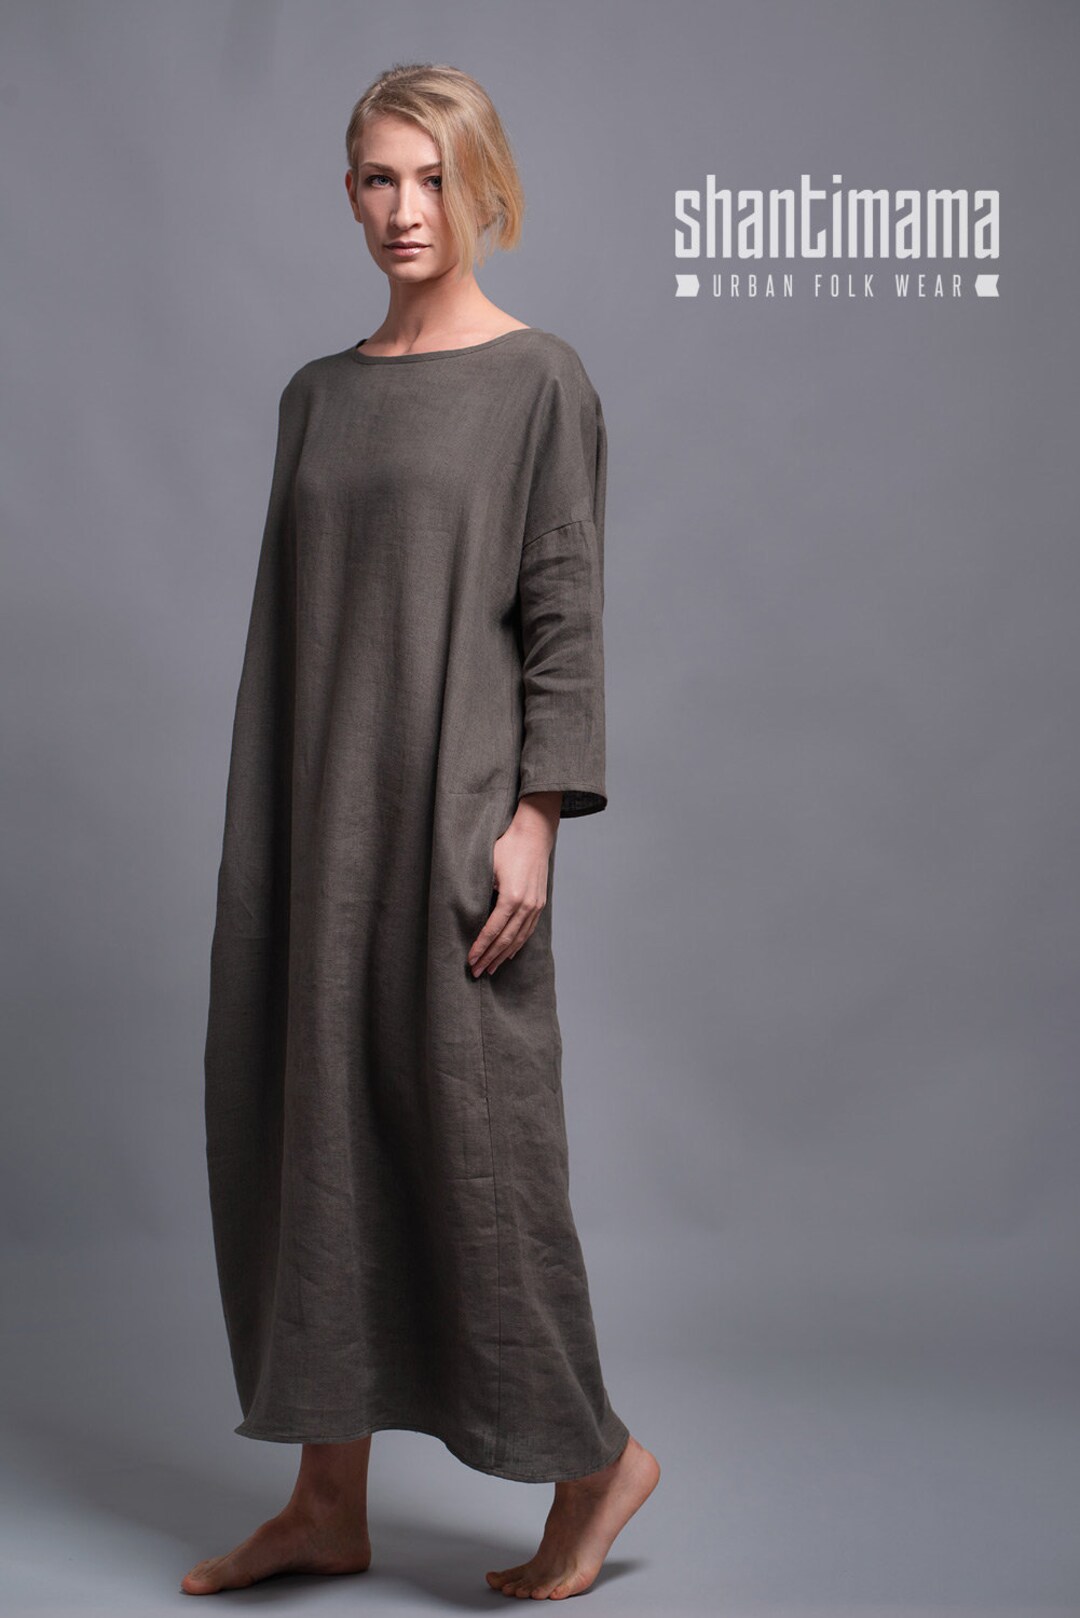 Washed Linen Dress DOR, Casual Maxi Day Dress Plus Size, Oversize Long ...